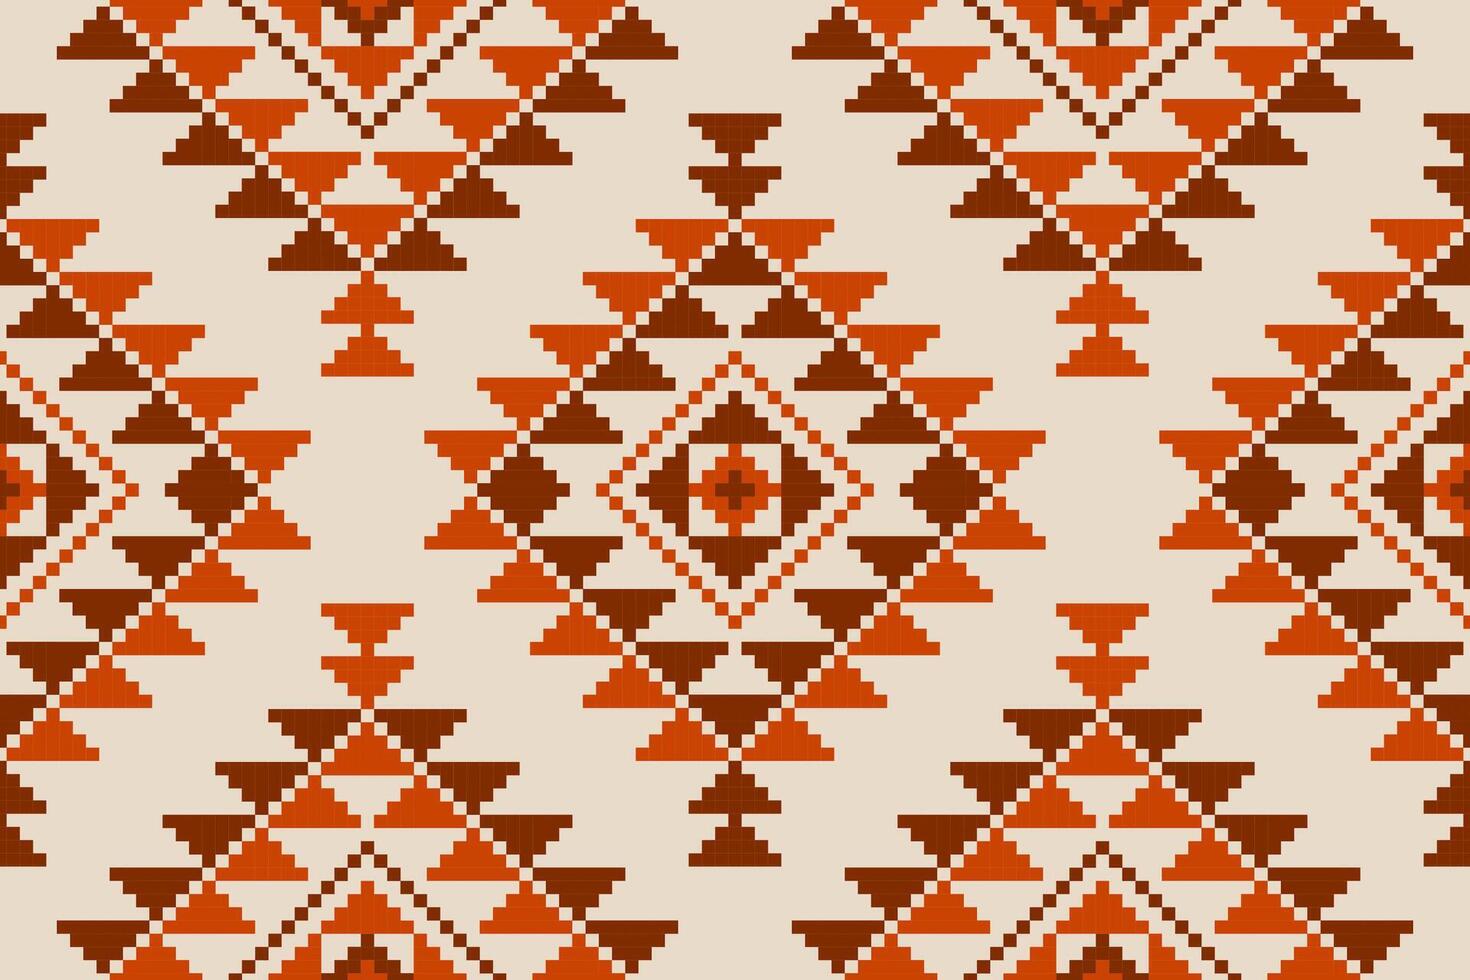 Fabric Mexican style. Geometric ethnic seamless pattern in tribal. Aztec art ornament print. Design for background, wallpaper, illustration, fabric, clothing, carpet, textile, batik, embroidery. vector